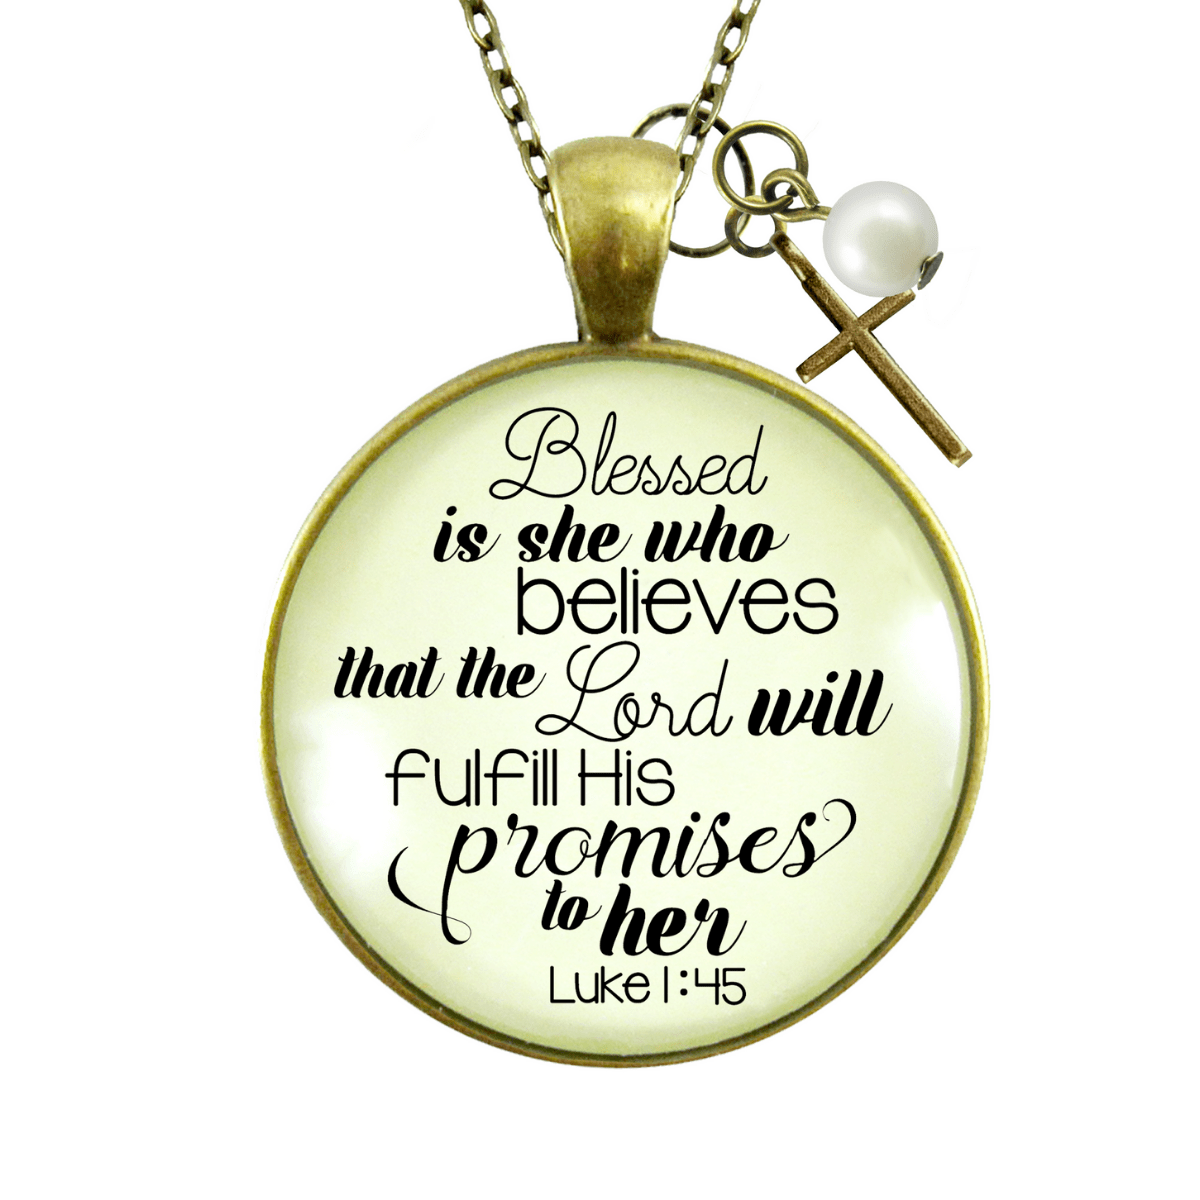 Gutsy Goodness Blessed is She Who Believes Necklace Bible Quote Cross Jewelry - Gutsy Goodness;Blessed Is She Who Believes Necklace Bible Quote Cross Jewelry - Gutsy Goodness Handmade Jewelry Gifts